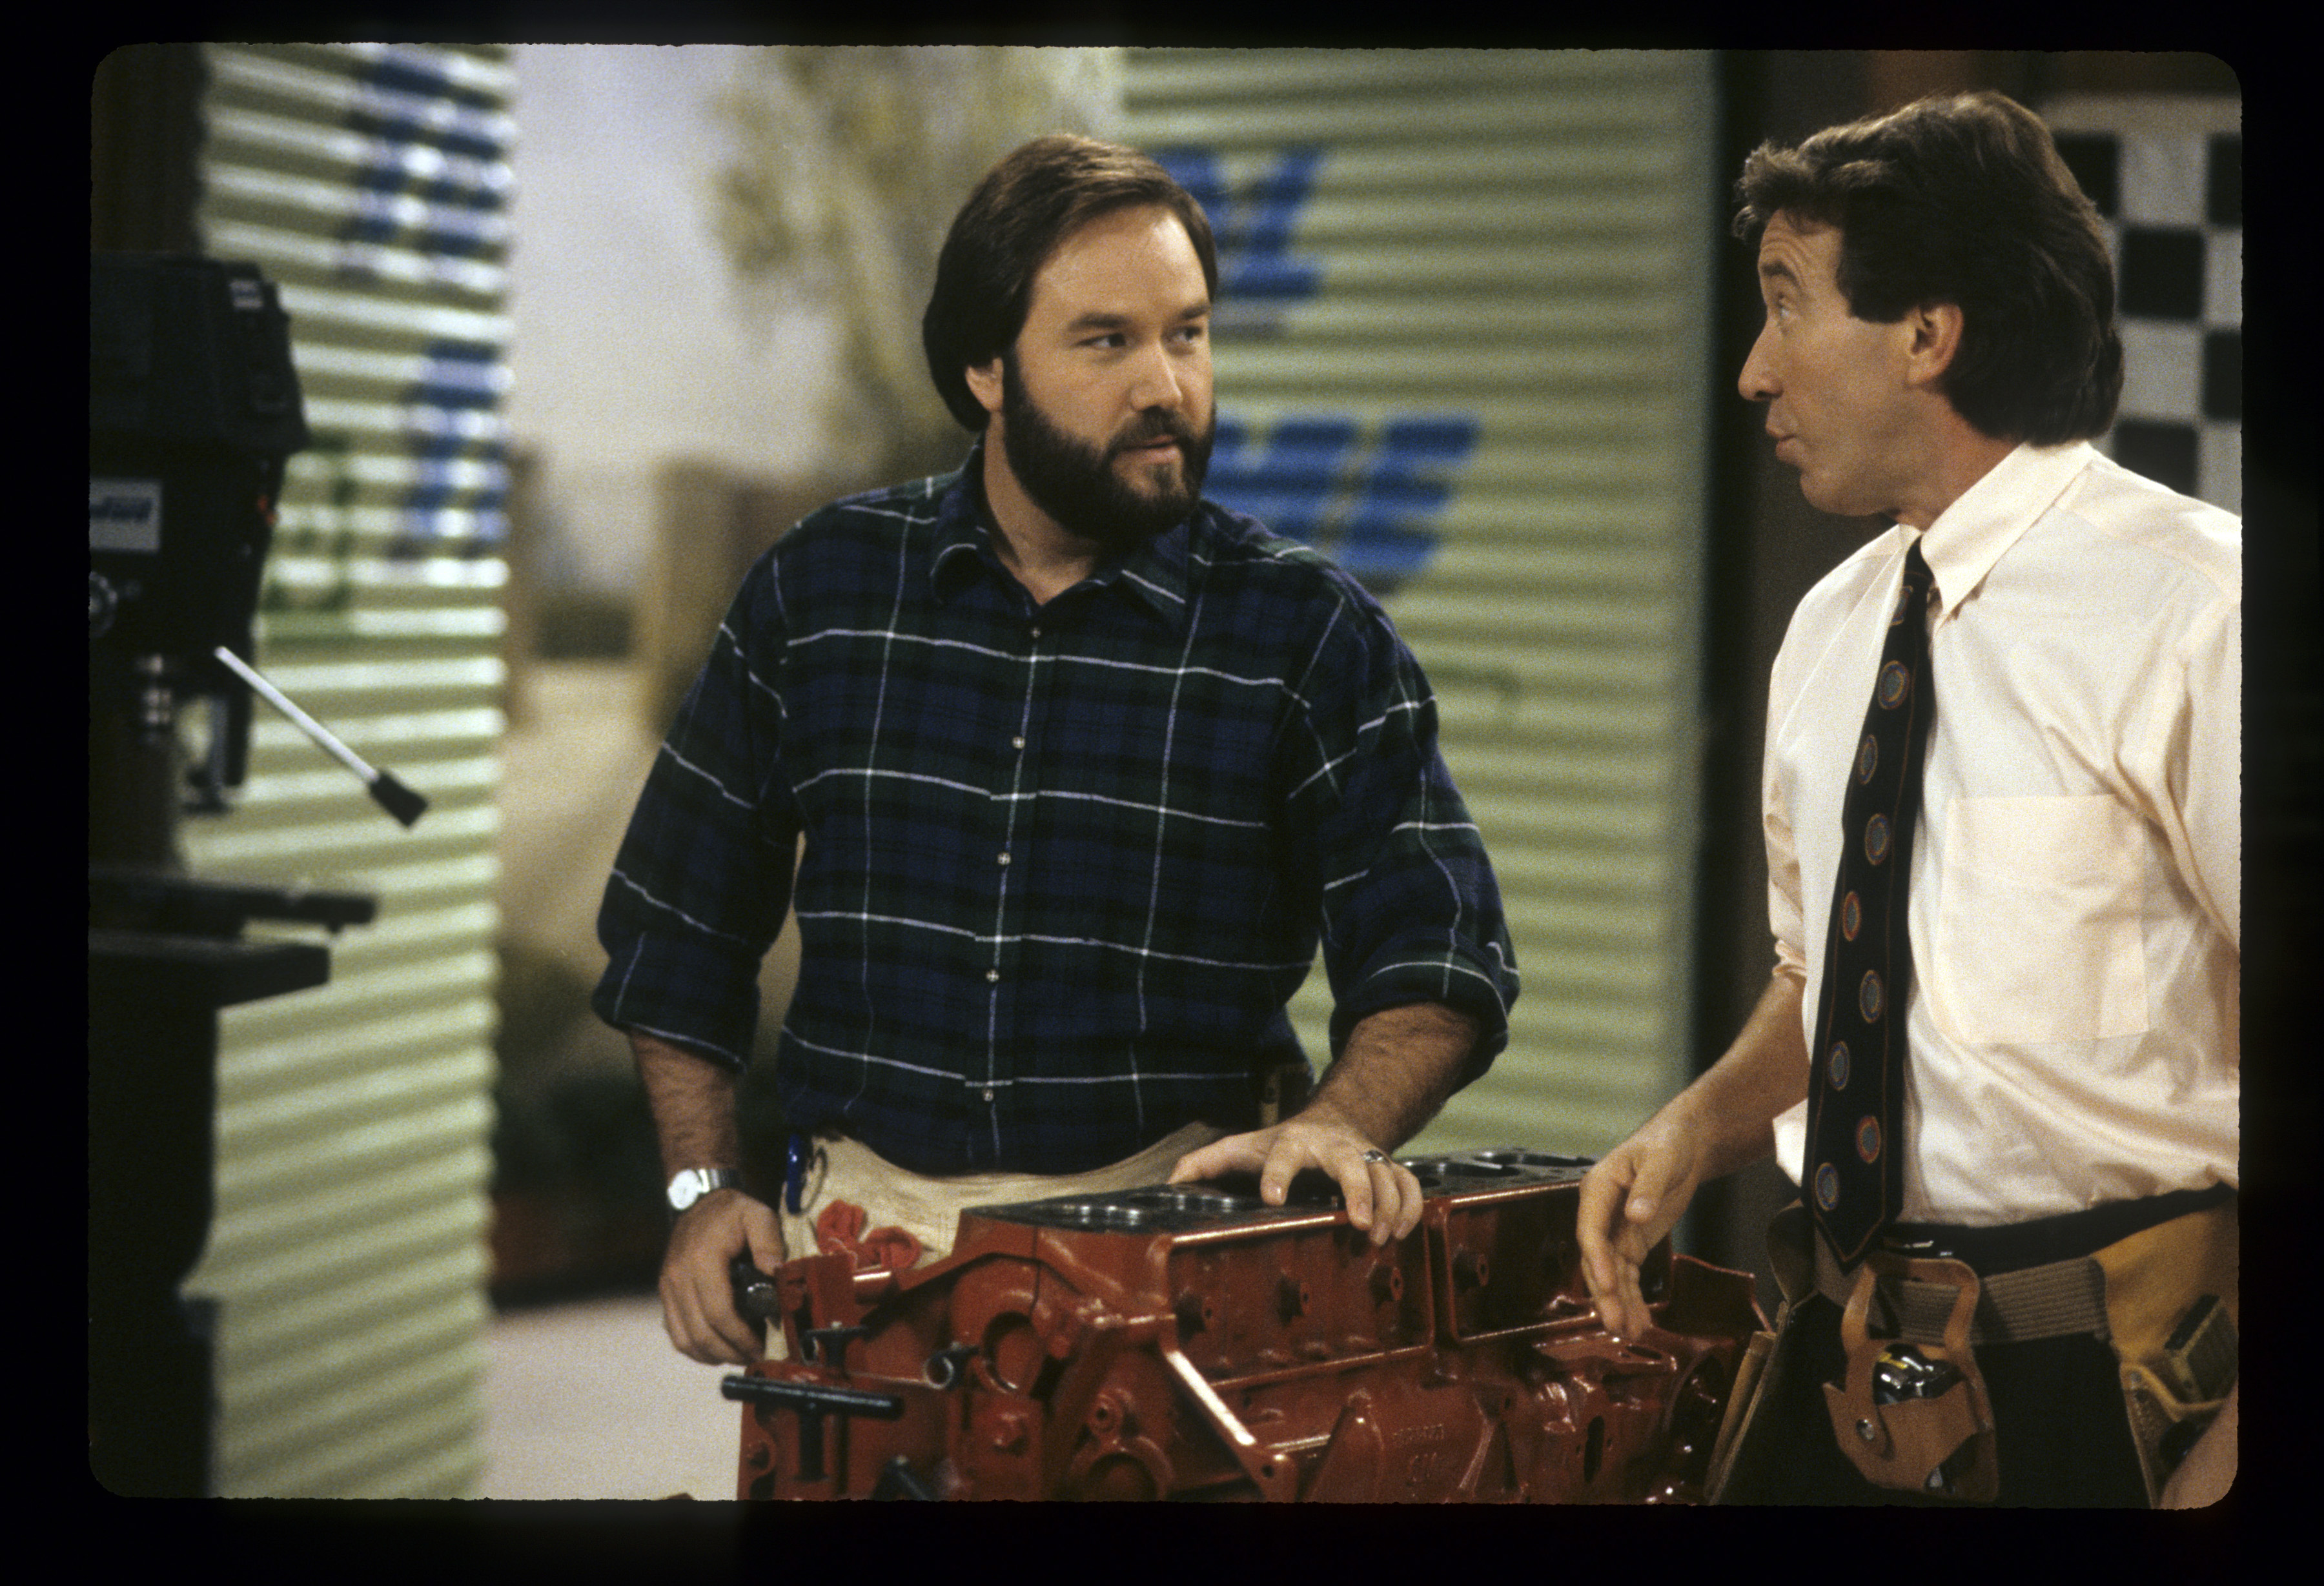 A Home Improvement Reboot Is In The Works 106.1 BLI